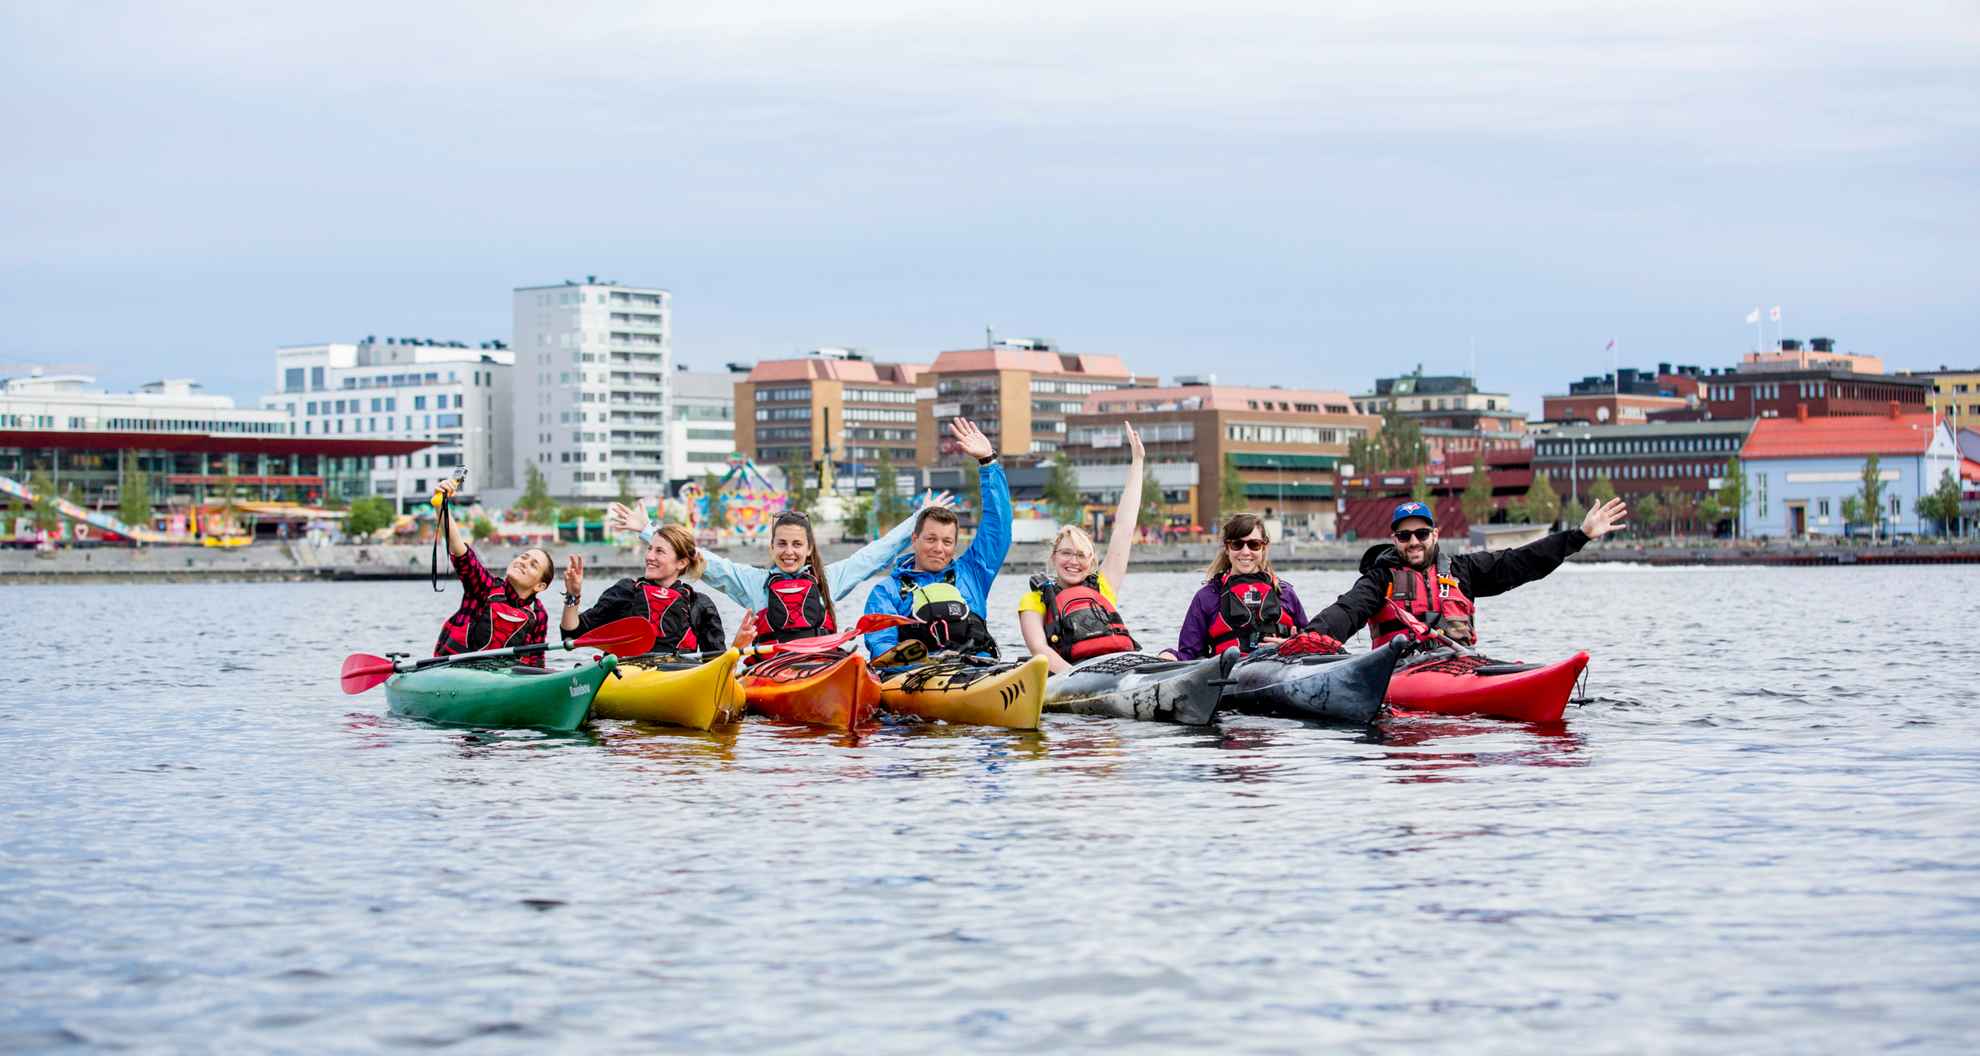 A group of seven people are kayaking. They are gathered and facing the camera in the sea in front of Luleå city.